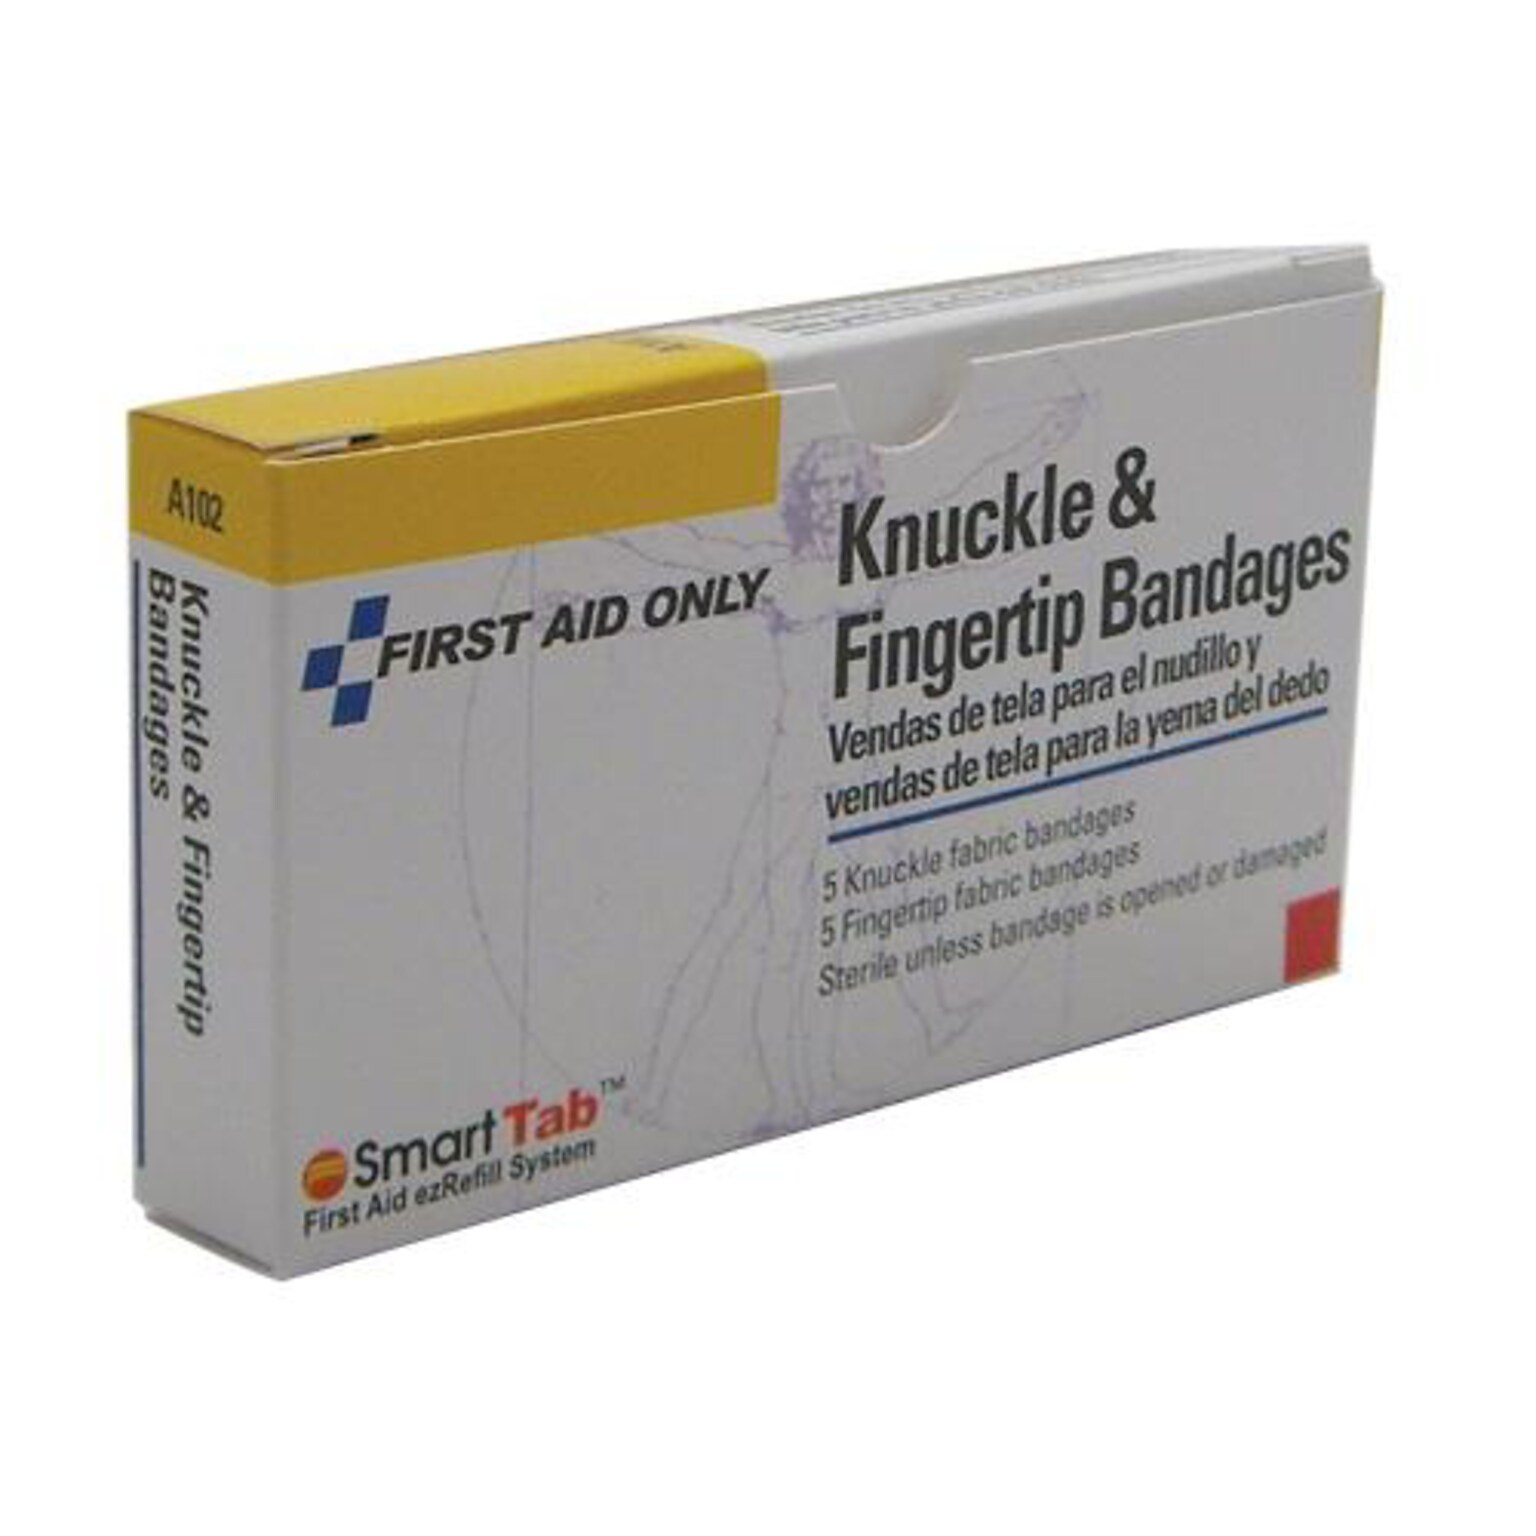 First Aid Only® Knuckle and Large Fingertip Bandage, 9/Box, 10 Boxes/Carton (1-014)